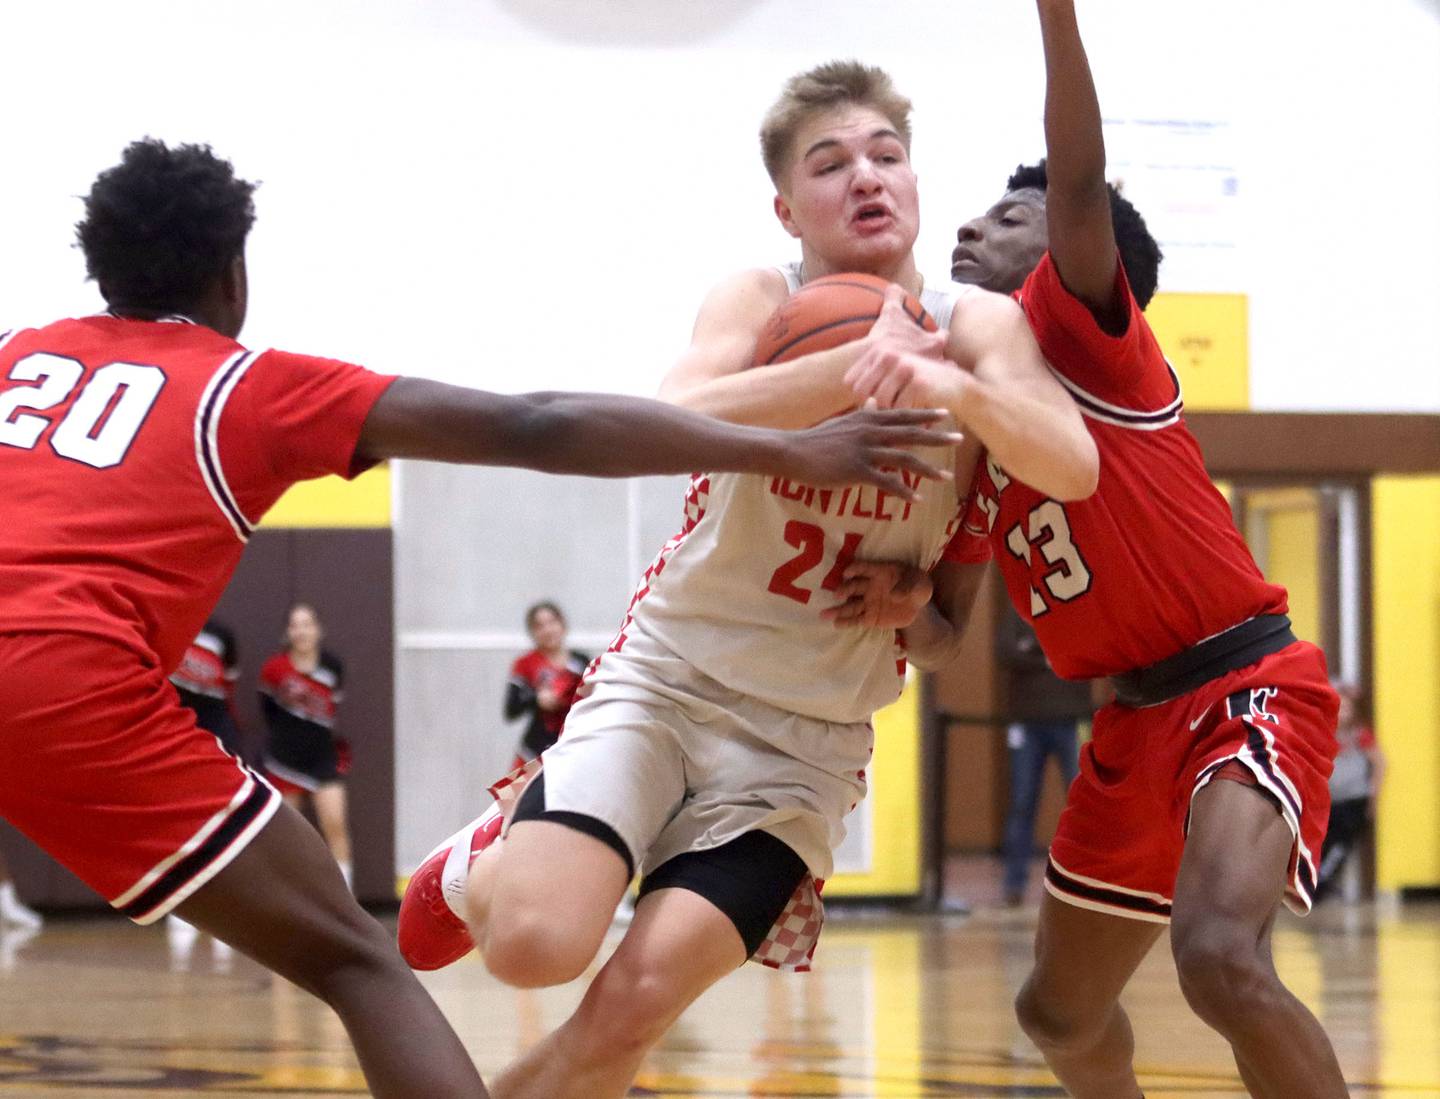 Huntley’s Aiden Wieczorek, center, muscles his way under the hoop against Rockford East’s Jemere Jefferson, right, during IHSA Class 4A Regional Championship game action Friday night at Jacobs High School in Algonquin.